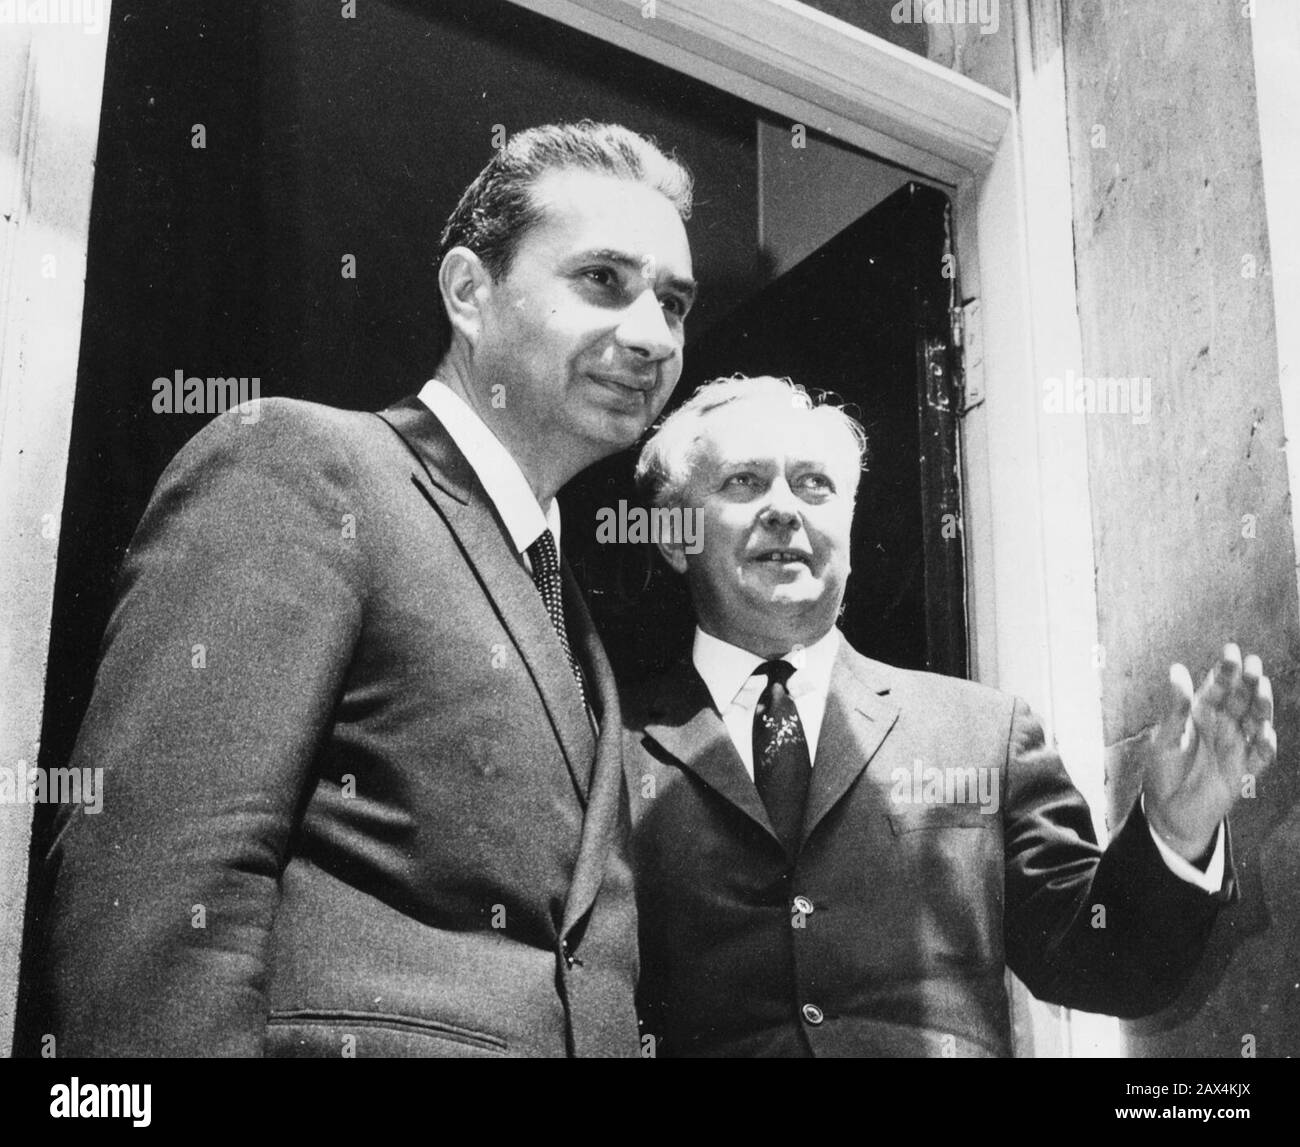 ubrugt stamme rør Page 3 - Aldo Moro High Resolution Stock Photography and Images - Alamy